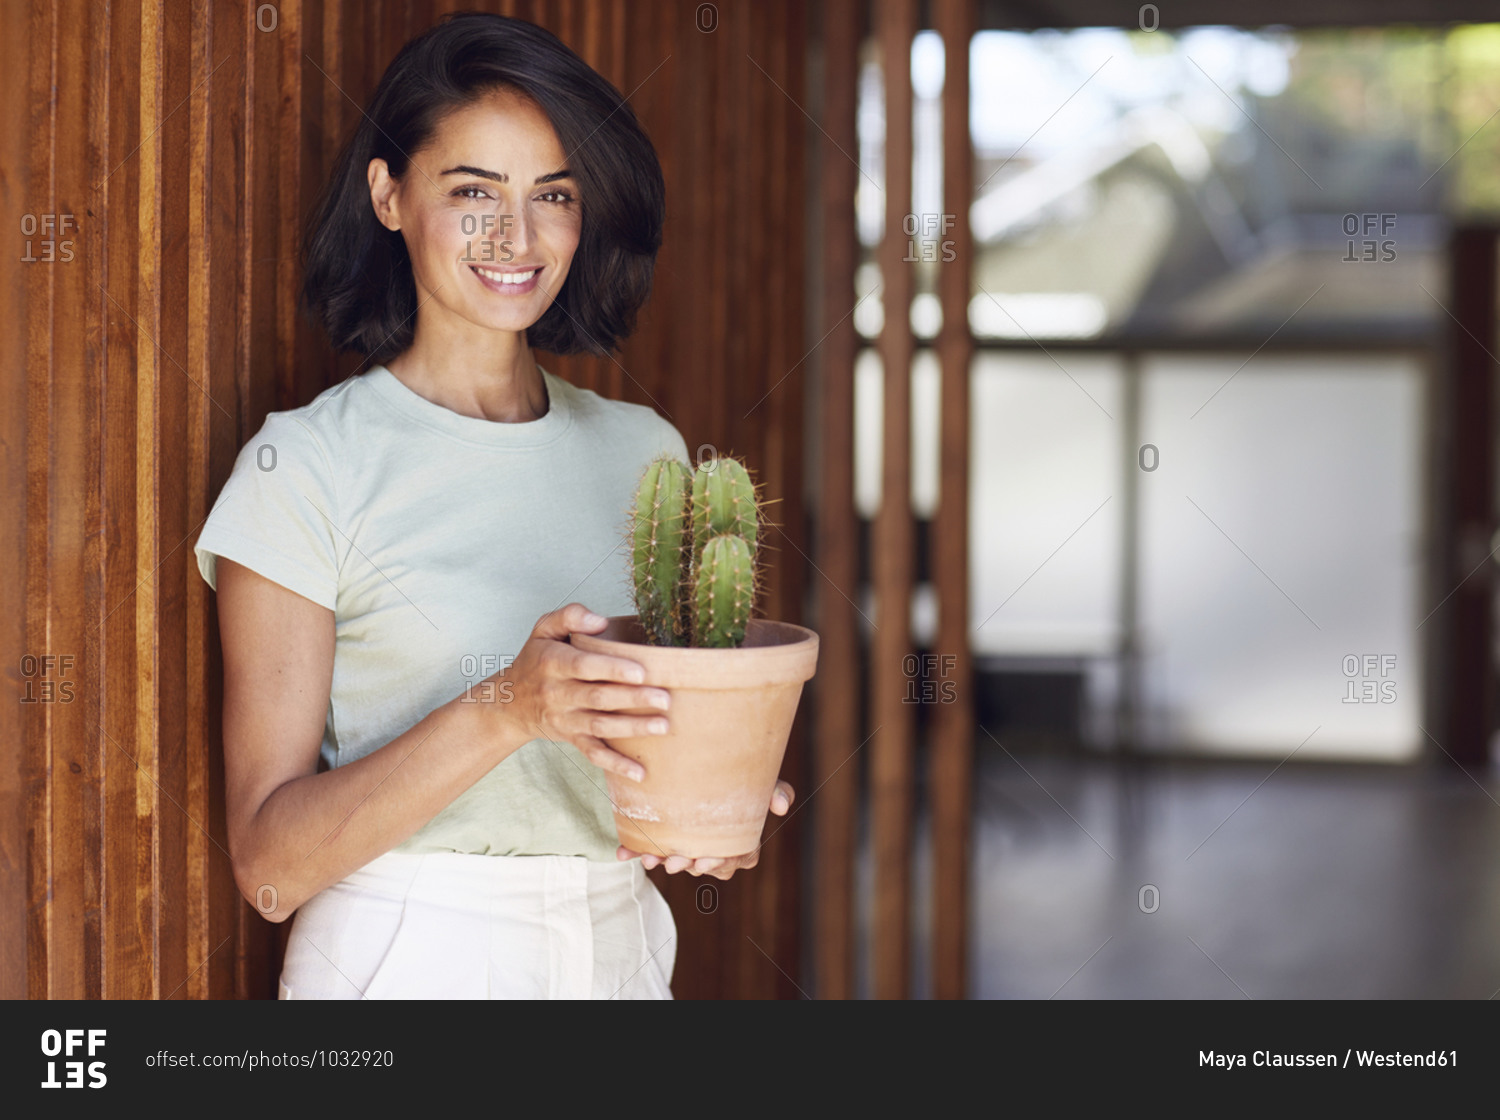 Smiling female entrepreneur holding cactus plant while standing by wooden wall in office